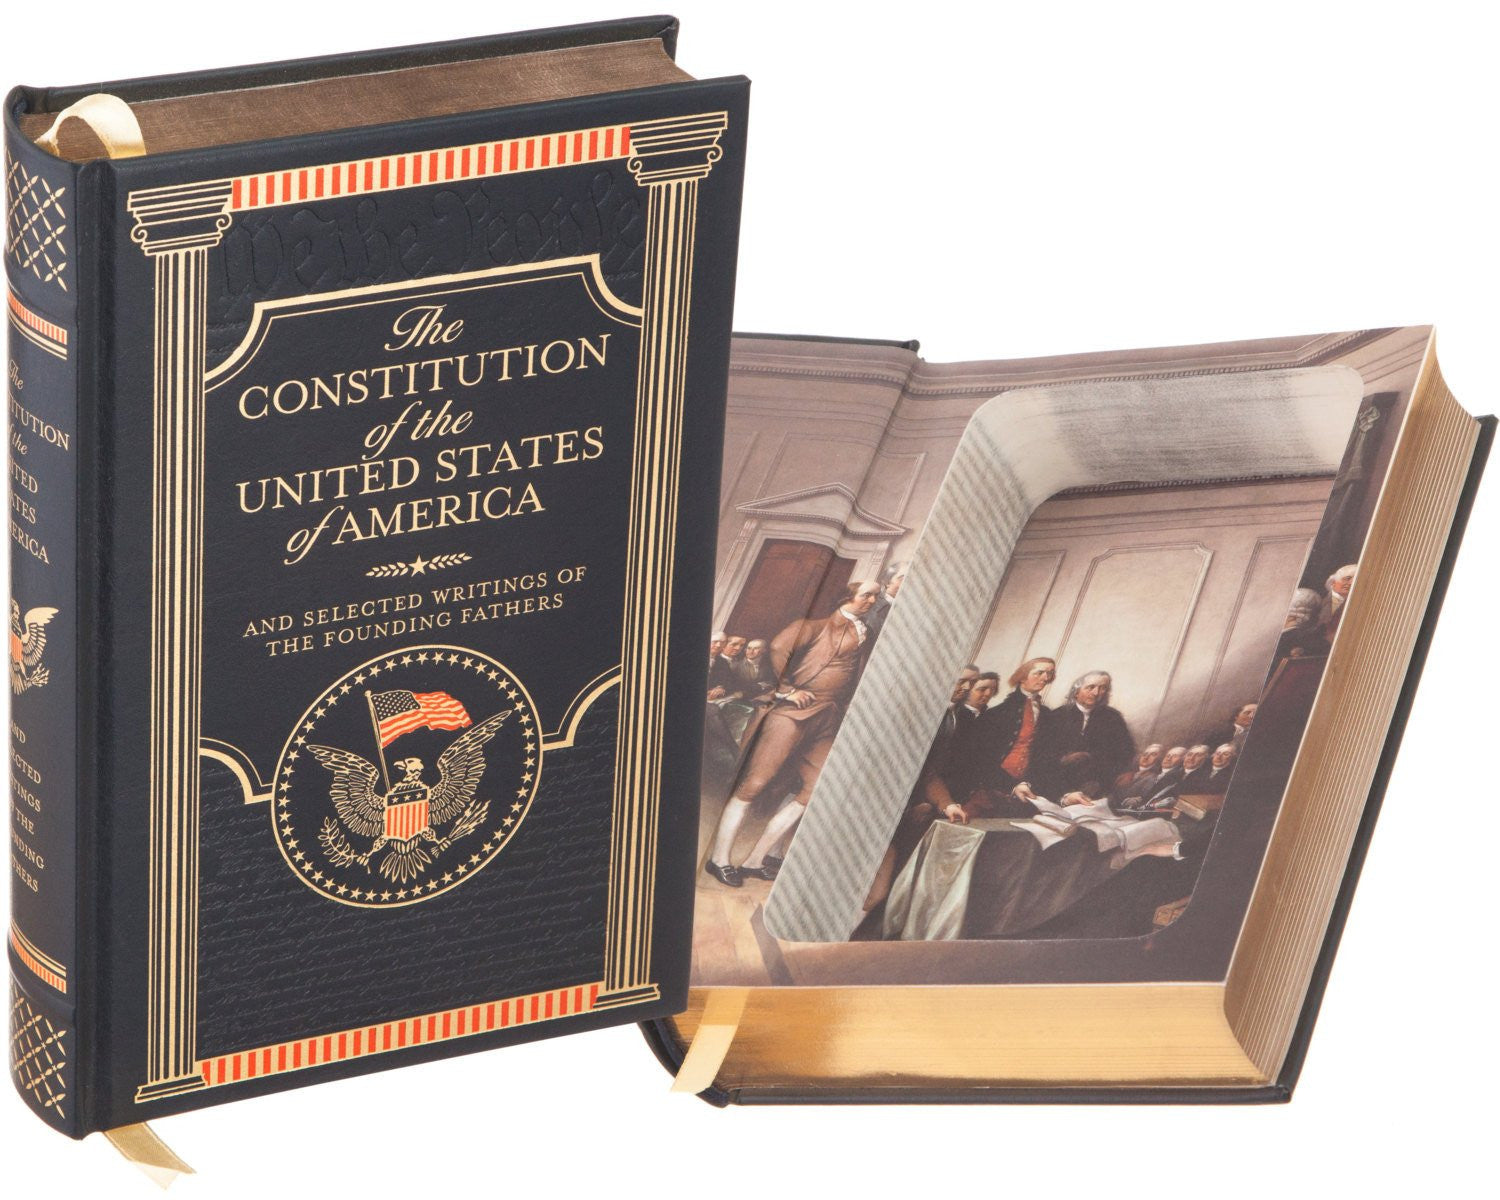 The Constitution of the United States of America: And Selected Writings of  the Founding Fathers: Various: 9781435139305: : Books